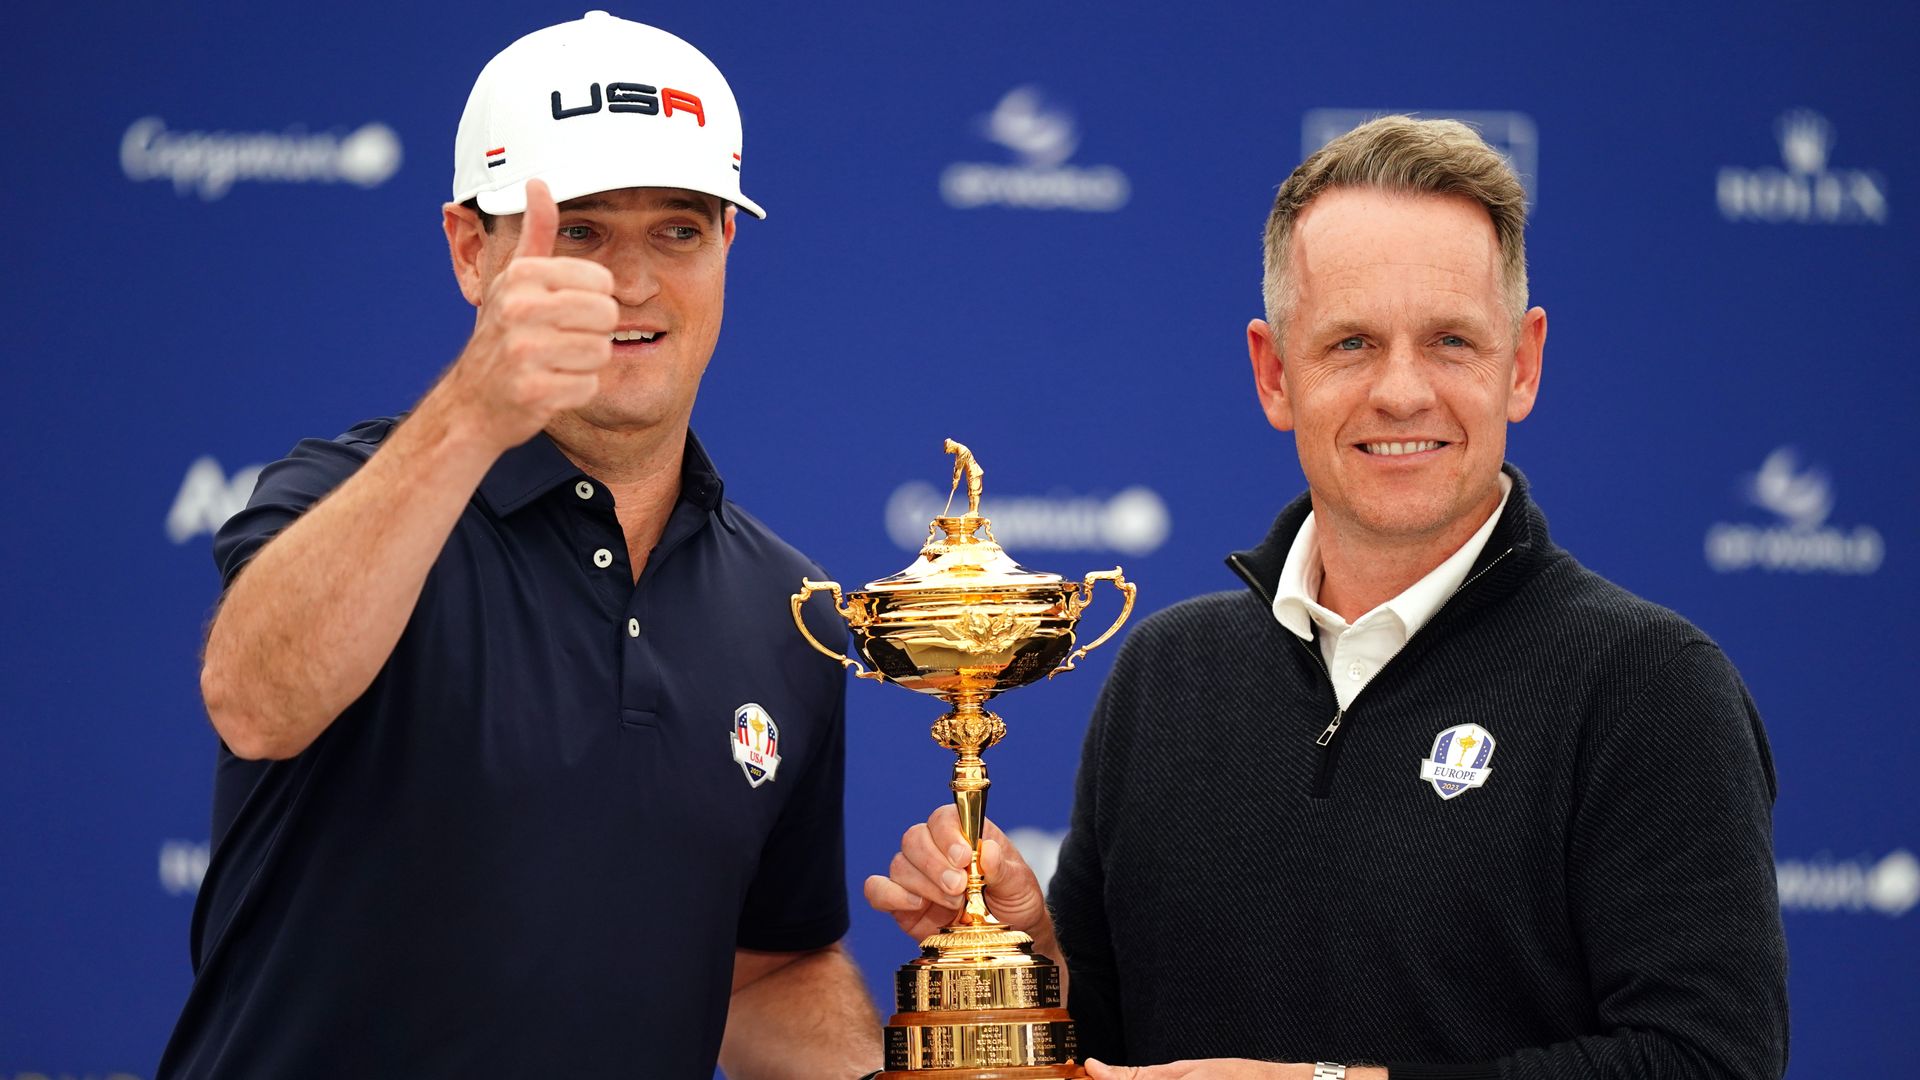 When is the Ryder Cup live on Sky Sports?